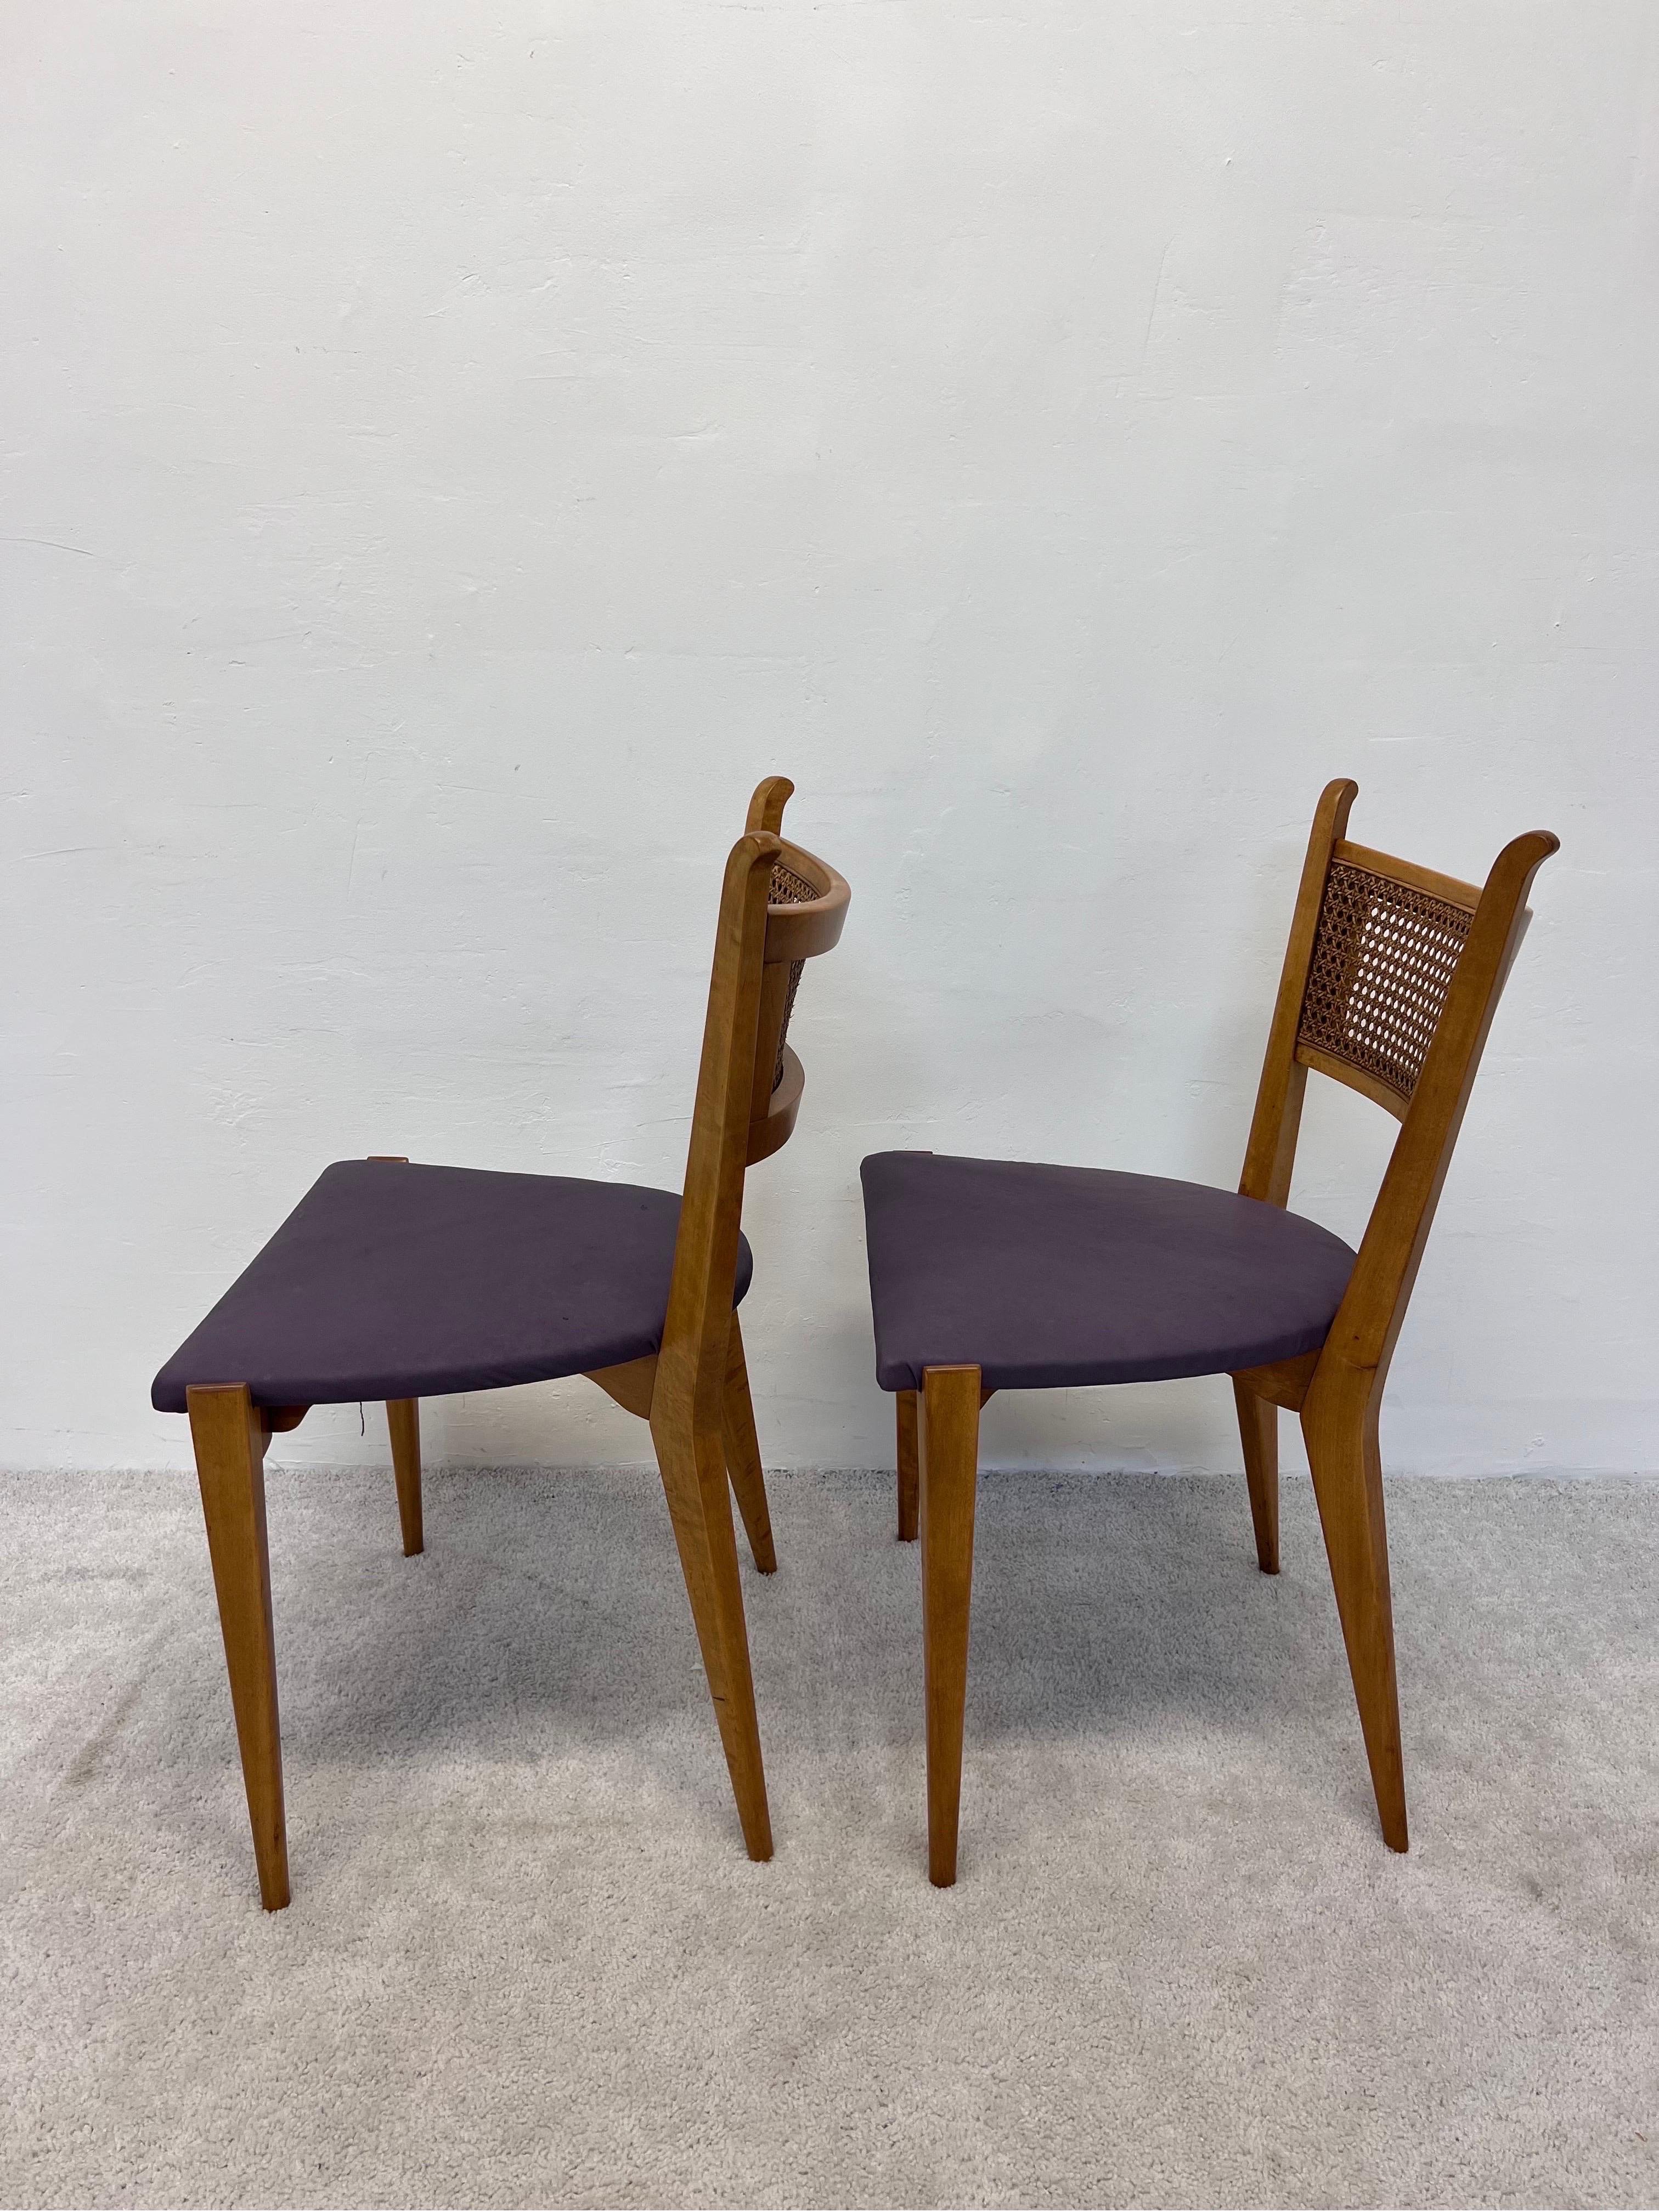 Edmund J Spence Cane Back Leather Dining or Side Chairs In Good Condition For Sale In Miami, FL